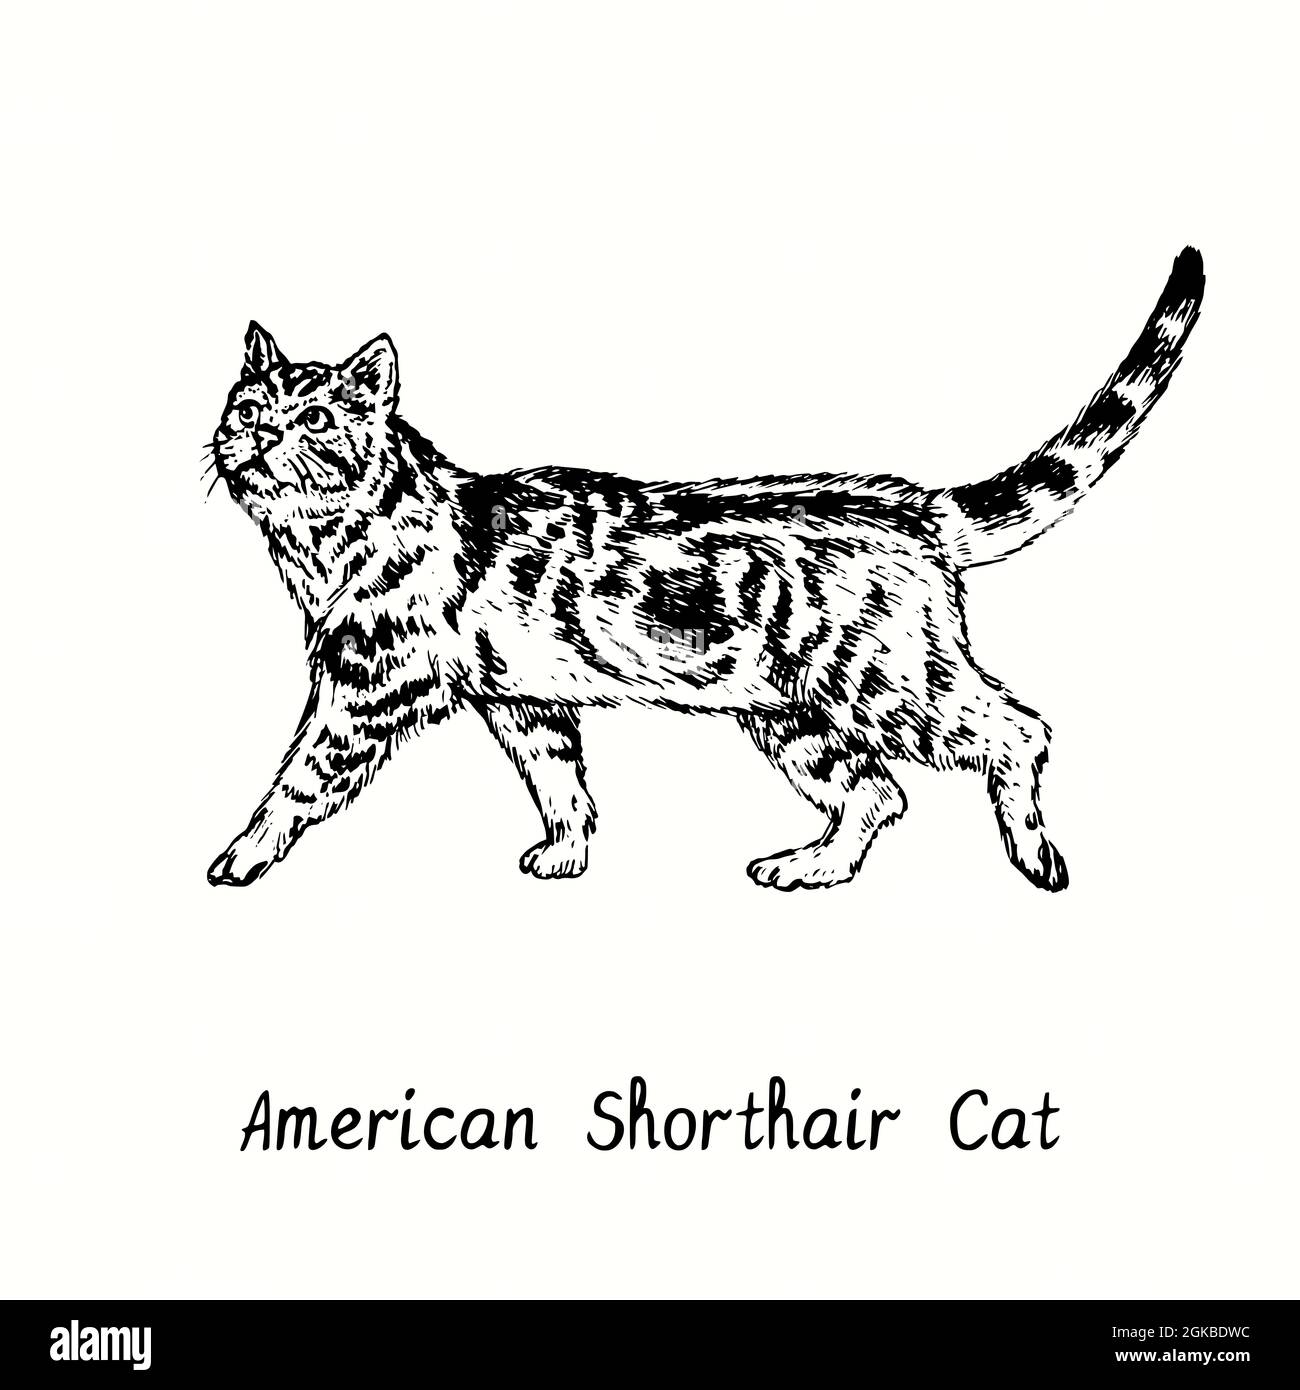 American Shorthair Cat standing side view. Ink black and white doodle drawing in woodcut style. Stock Photo